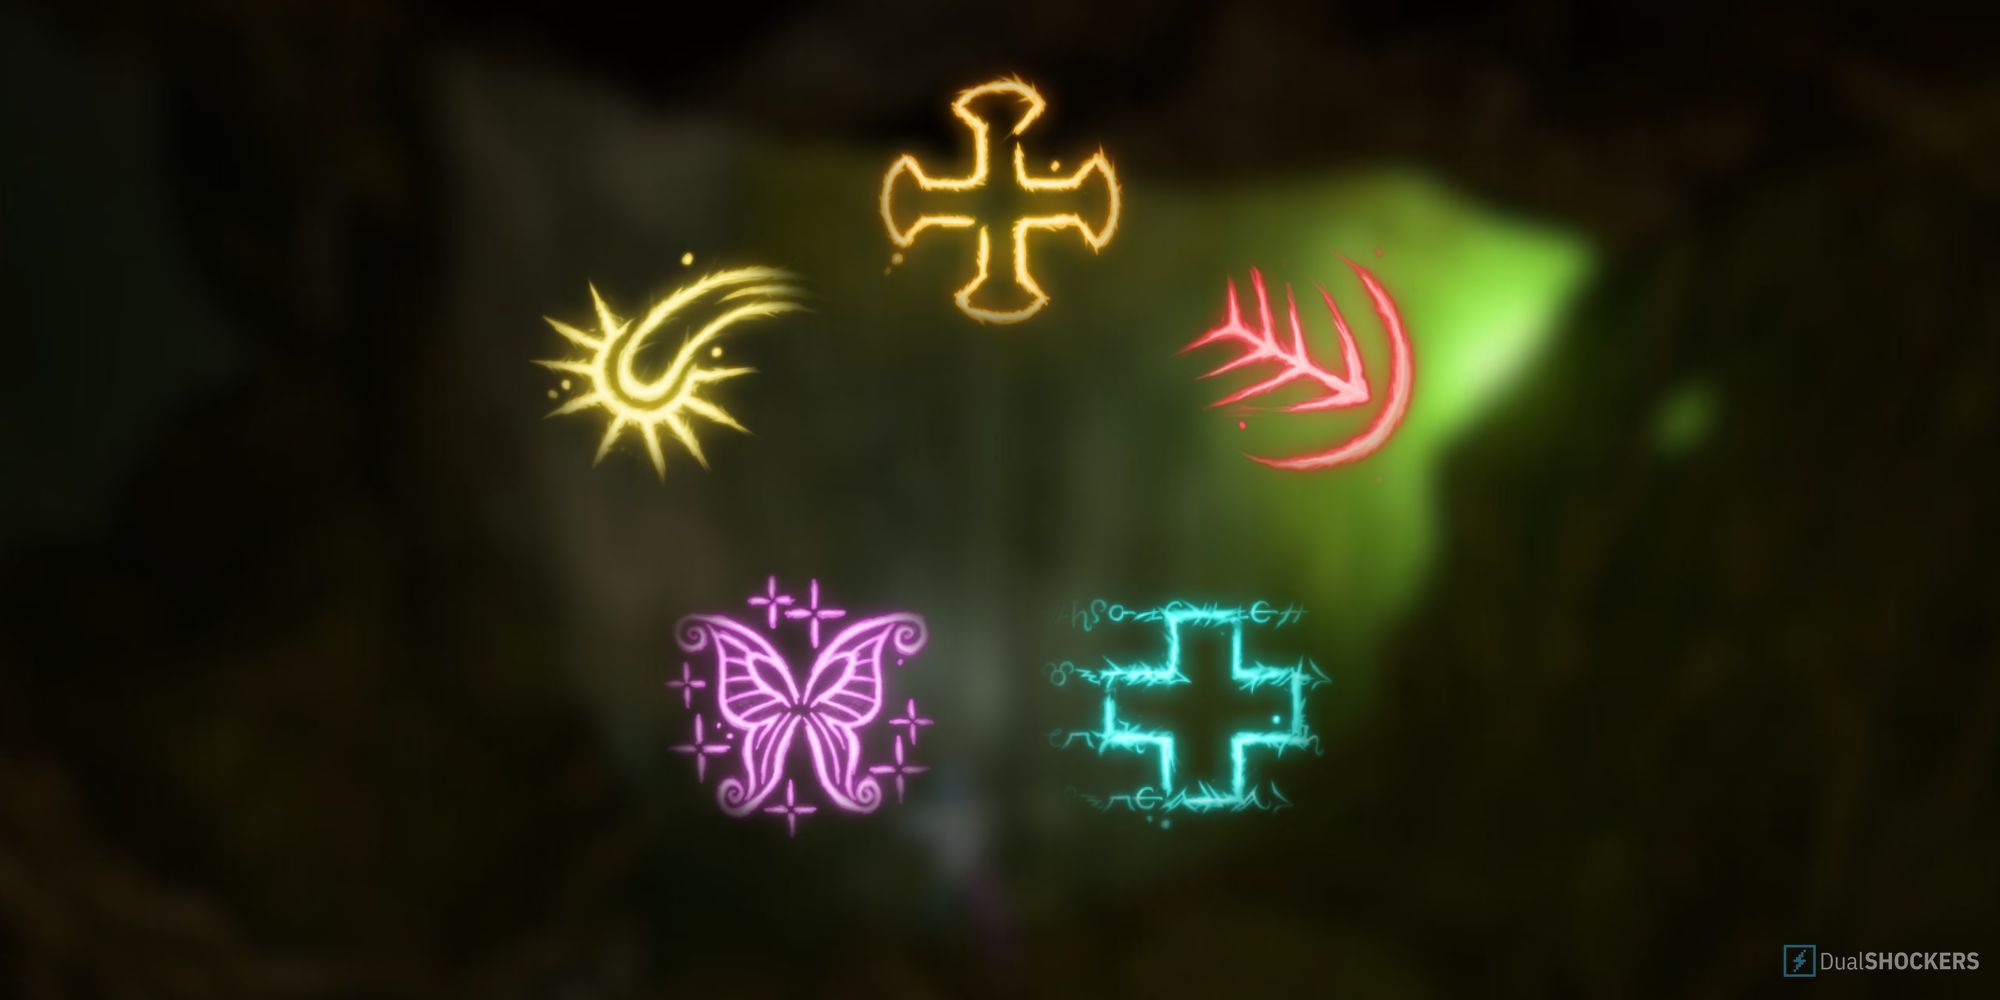 five spell icons from Baldur's gate arranged in a circle with a waterfall in the background